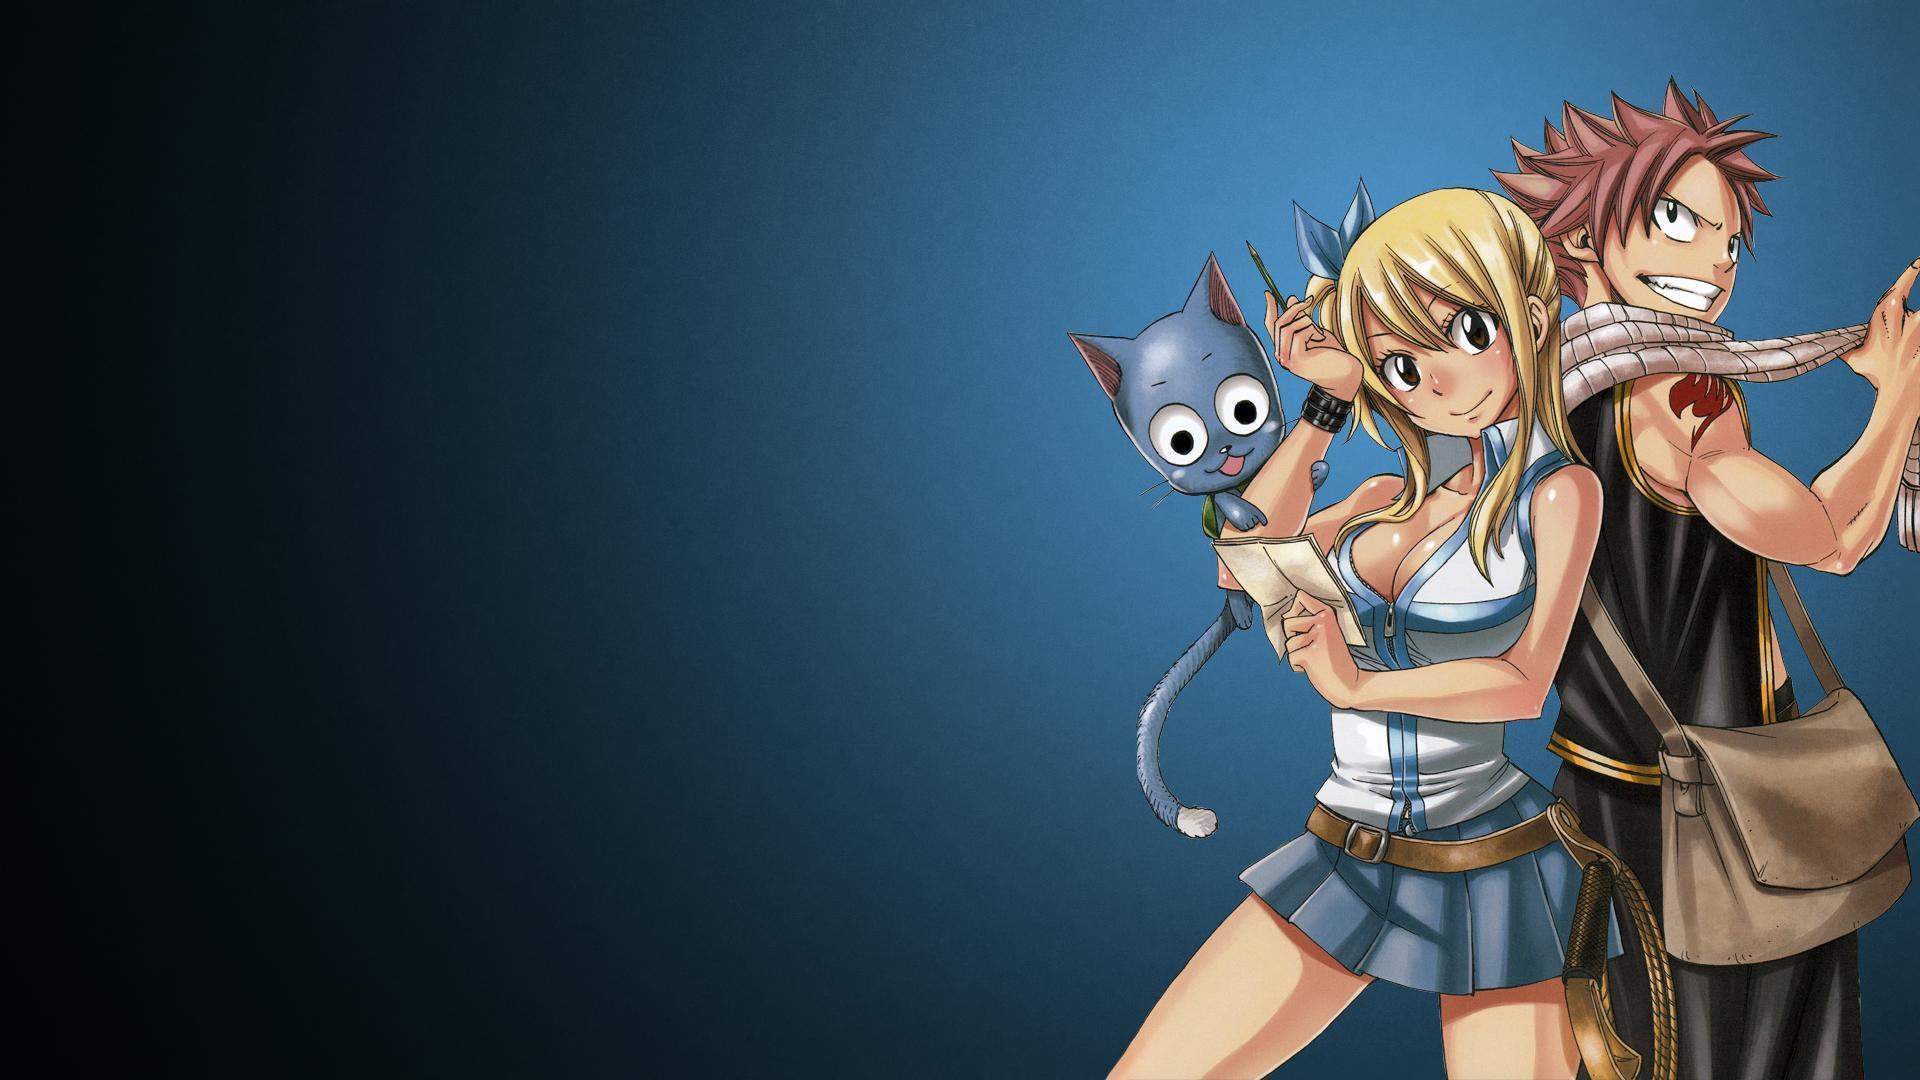 Fairy Tail Hd Wallpaper 4k For Pc, Fairy Tail, Anime